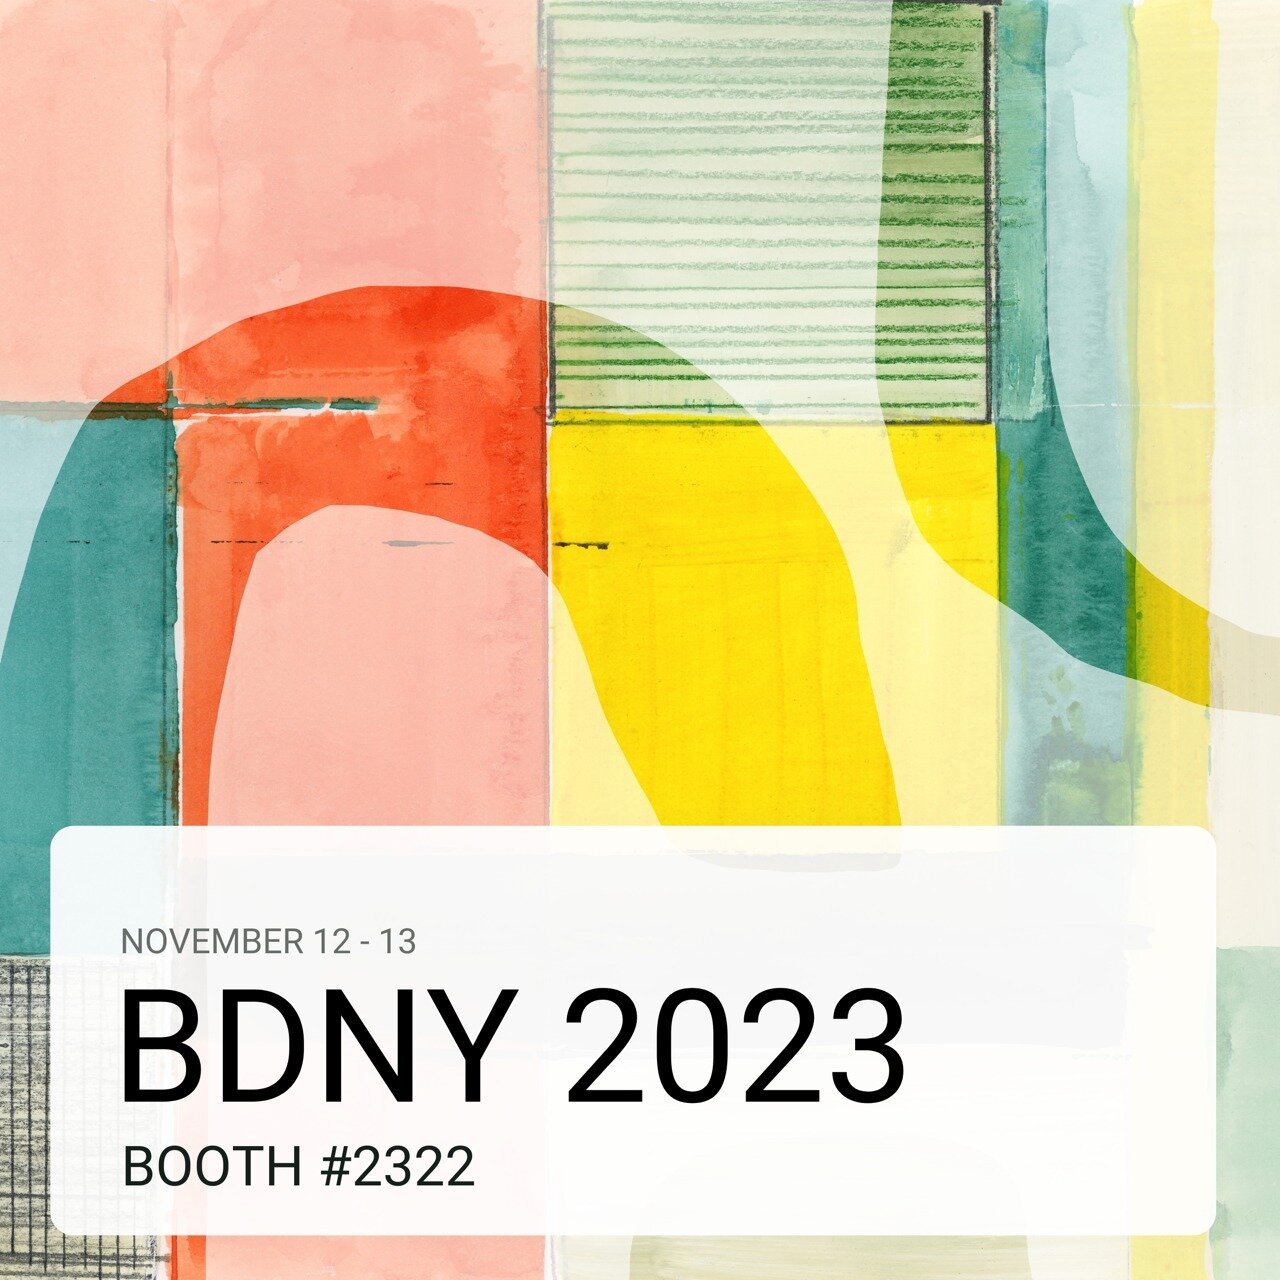 🎉 Save the Date! We're thrilled to share that we'll be showcasing our latest art innovations at the BDNY Trade Show on November 12-13, 2023. Get ready to be inspired! 

#BDNY2023 #PiFineArt #Art #Design #HospitalityDesign #TradeShow #NYC #innovation